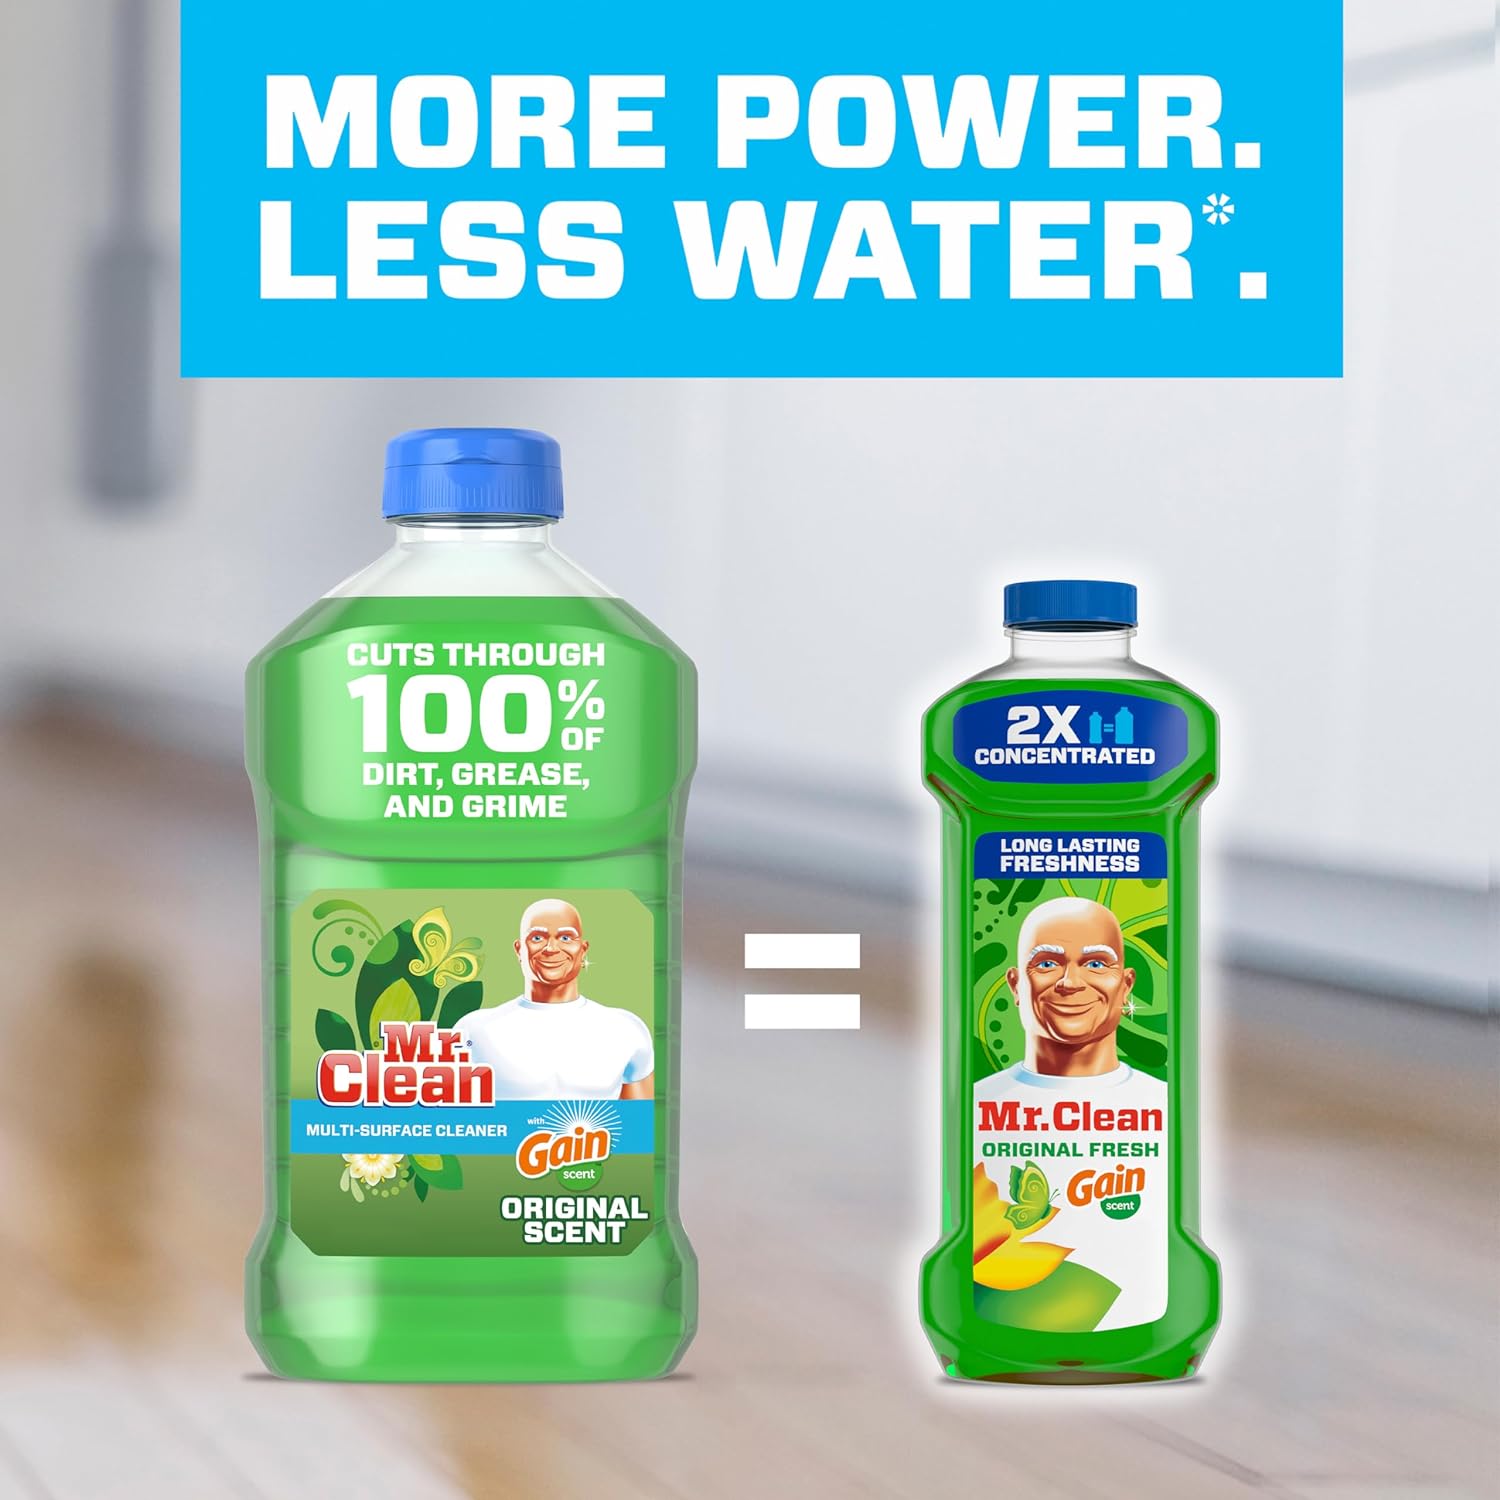 Mr. Clean 2X Concentrated Multi Surface Cleaner with Gain Original Scent, All Purpose Cleaner, 41 fl oz : Everything Else